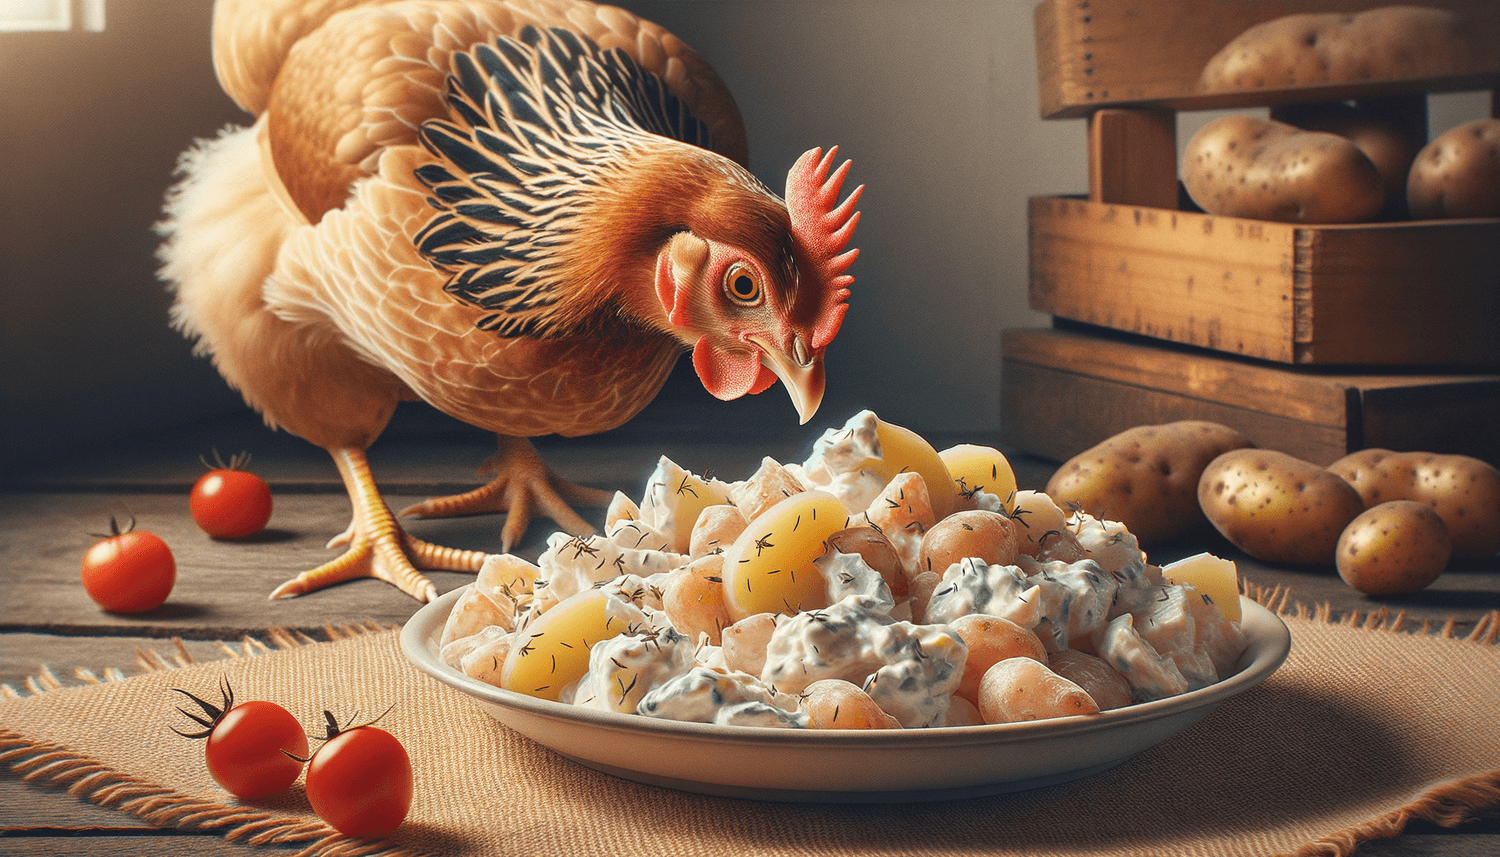 Can Chickens Eat Potato Salad?